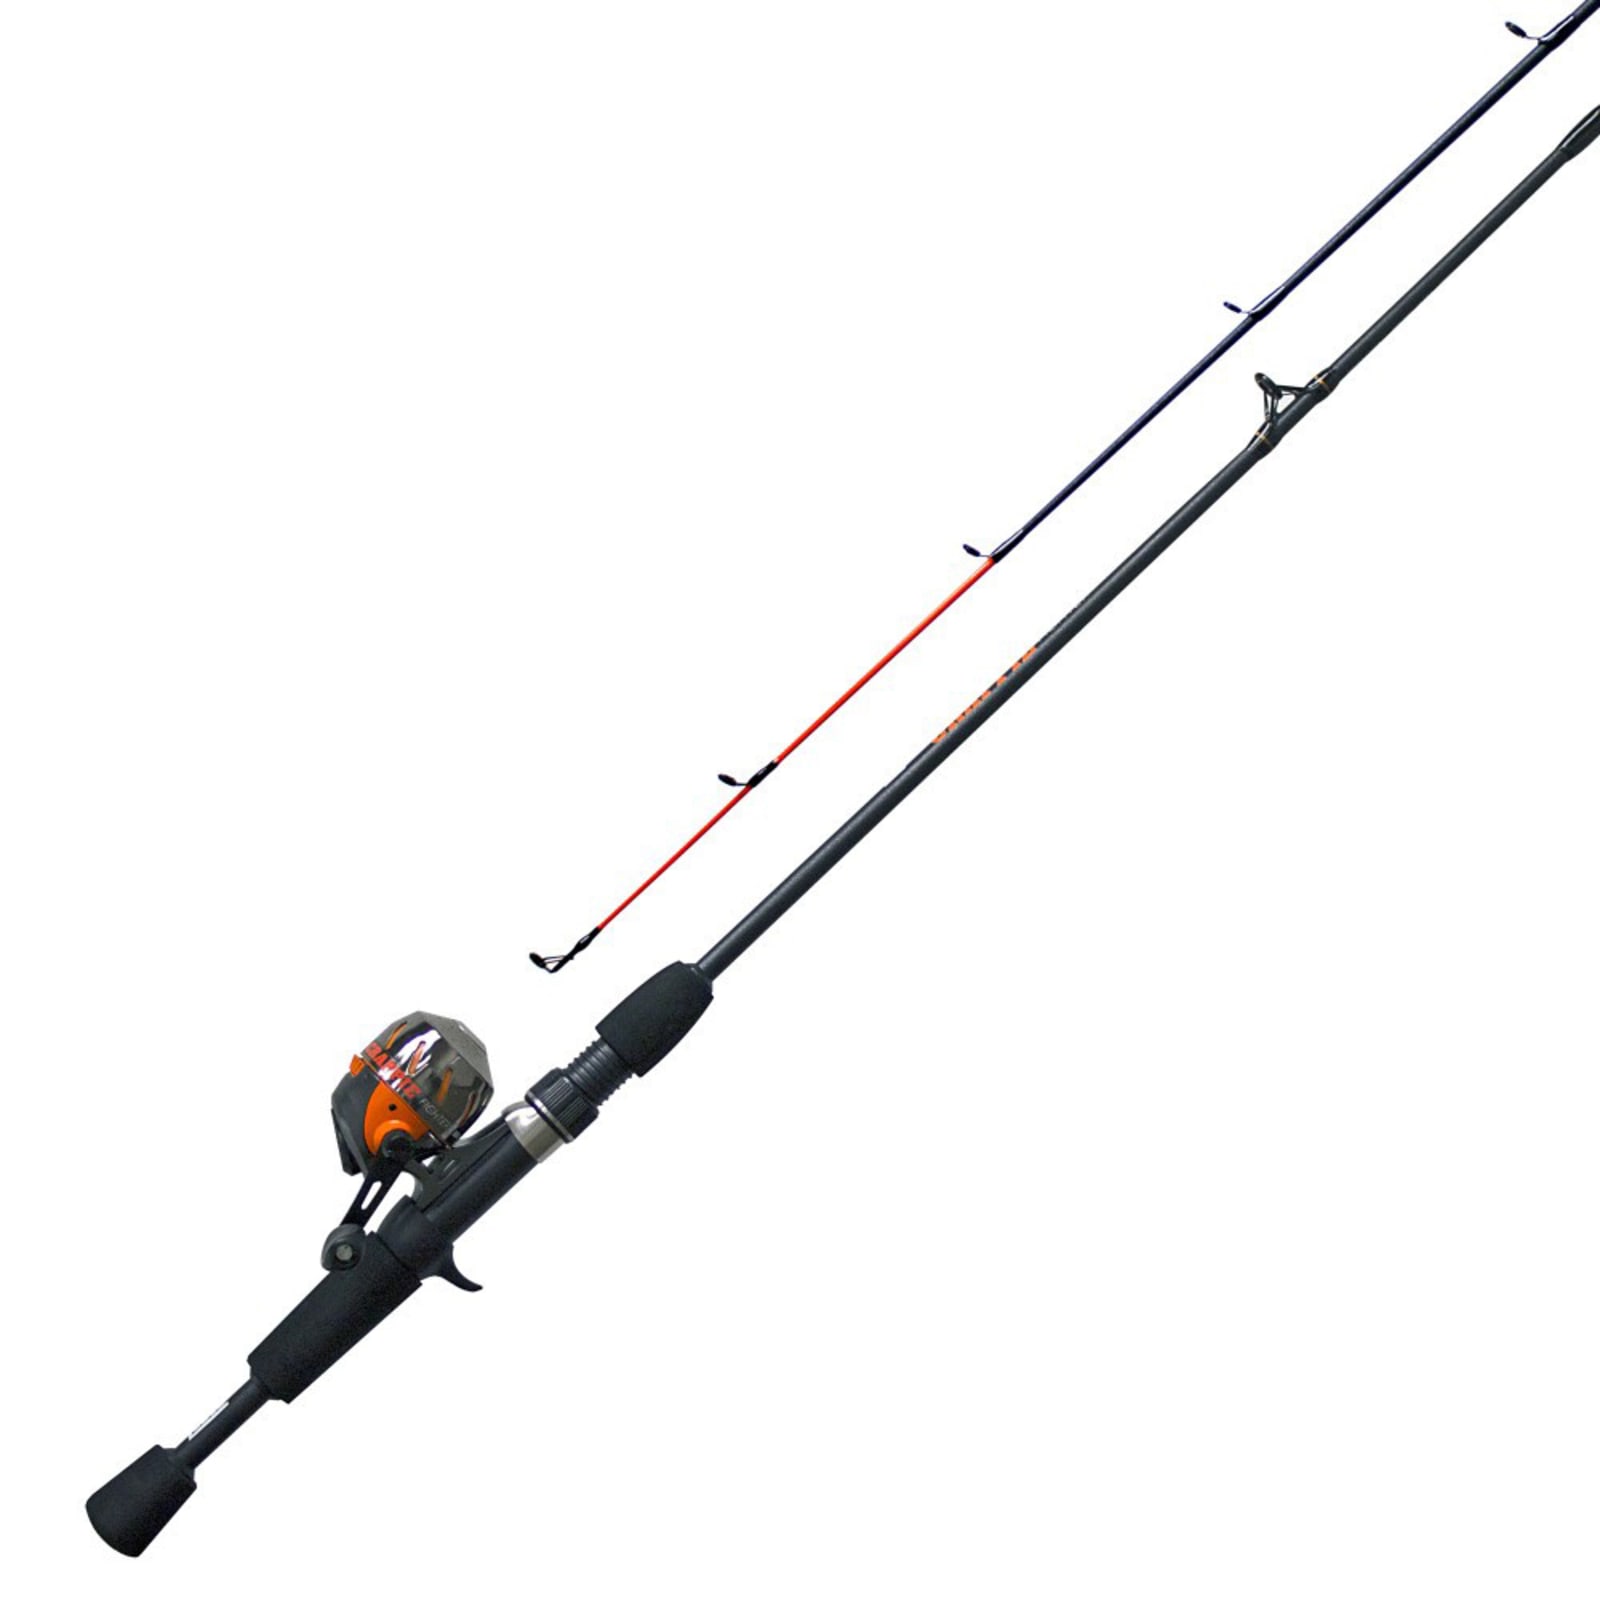 Crappie Fighter Spincast Fishing Combo by Zebco at Fleet Farm